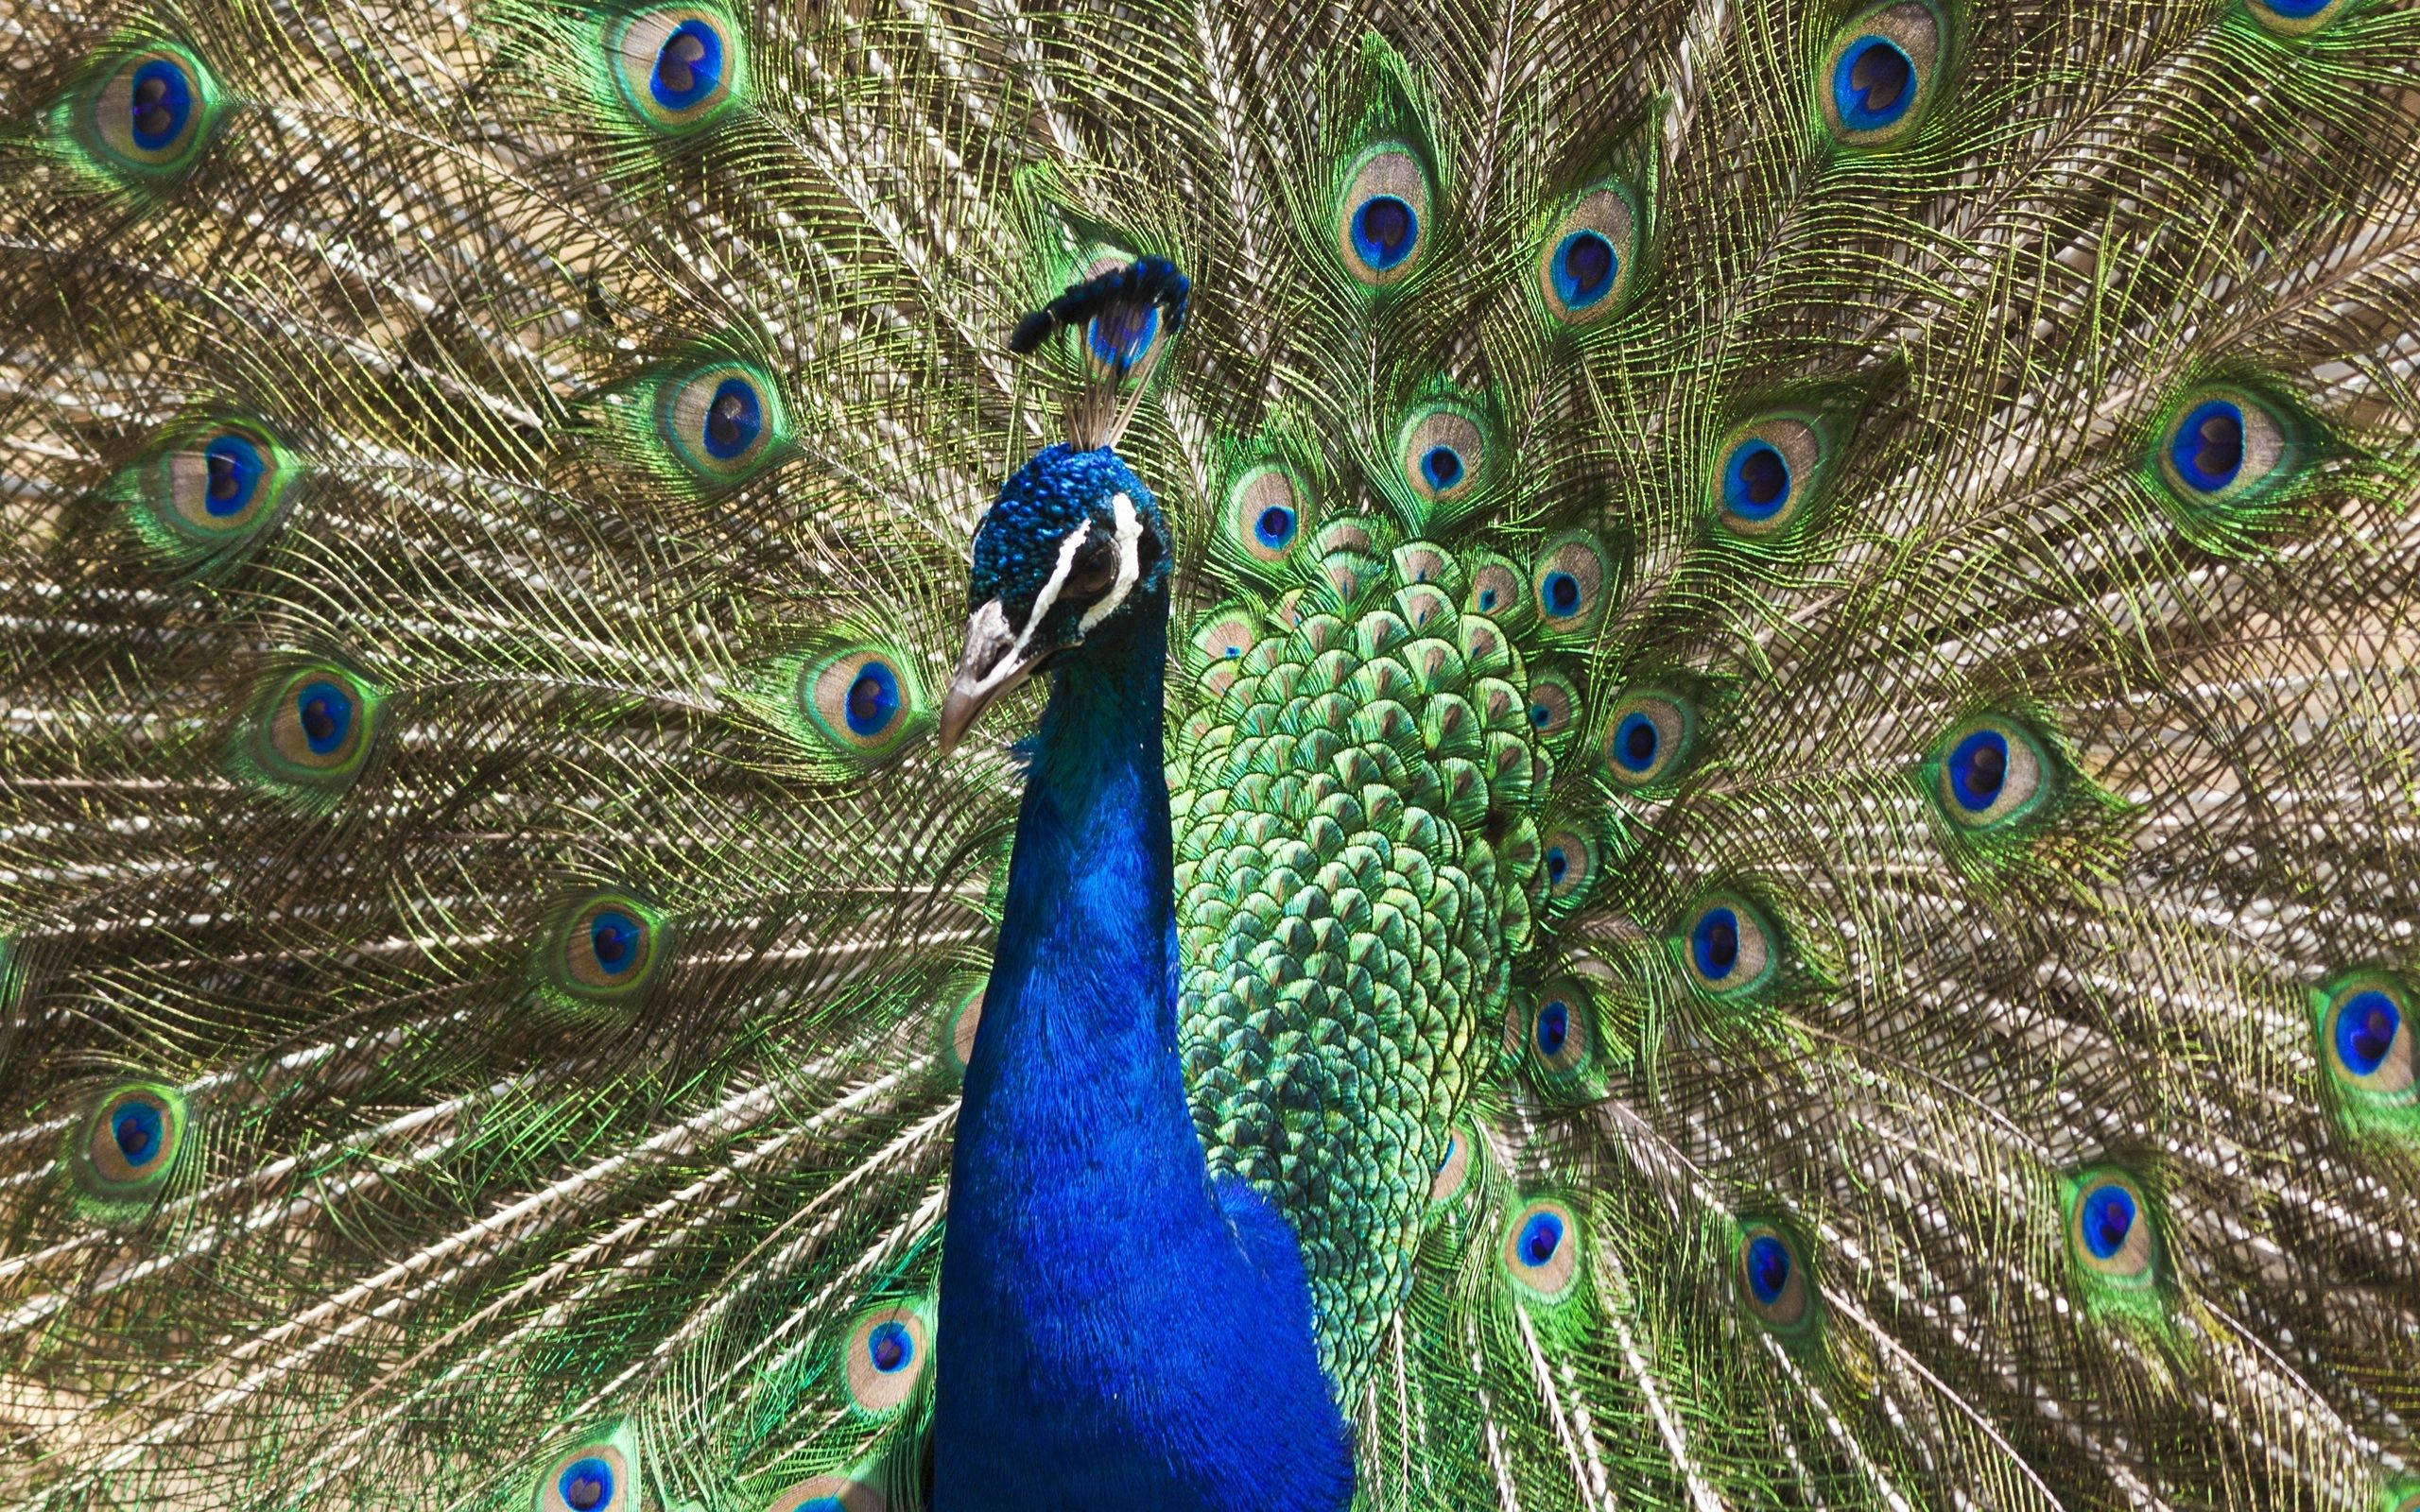 A Peacock With Its Feathers Spread Out Background